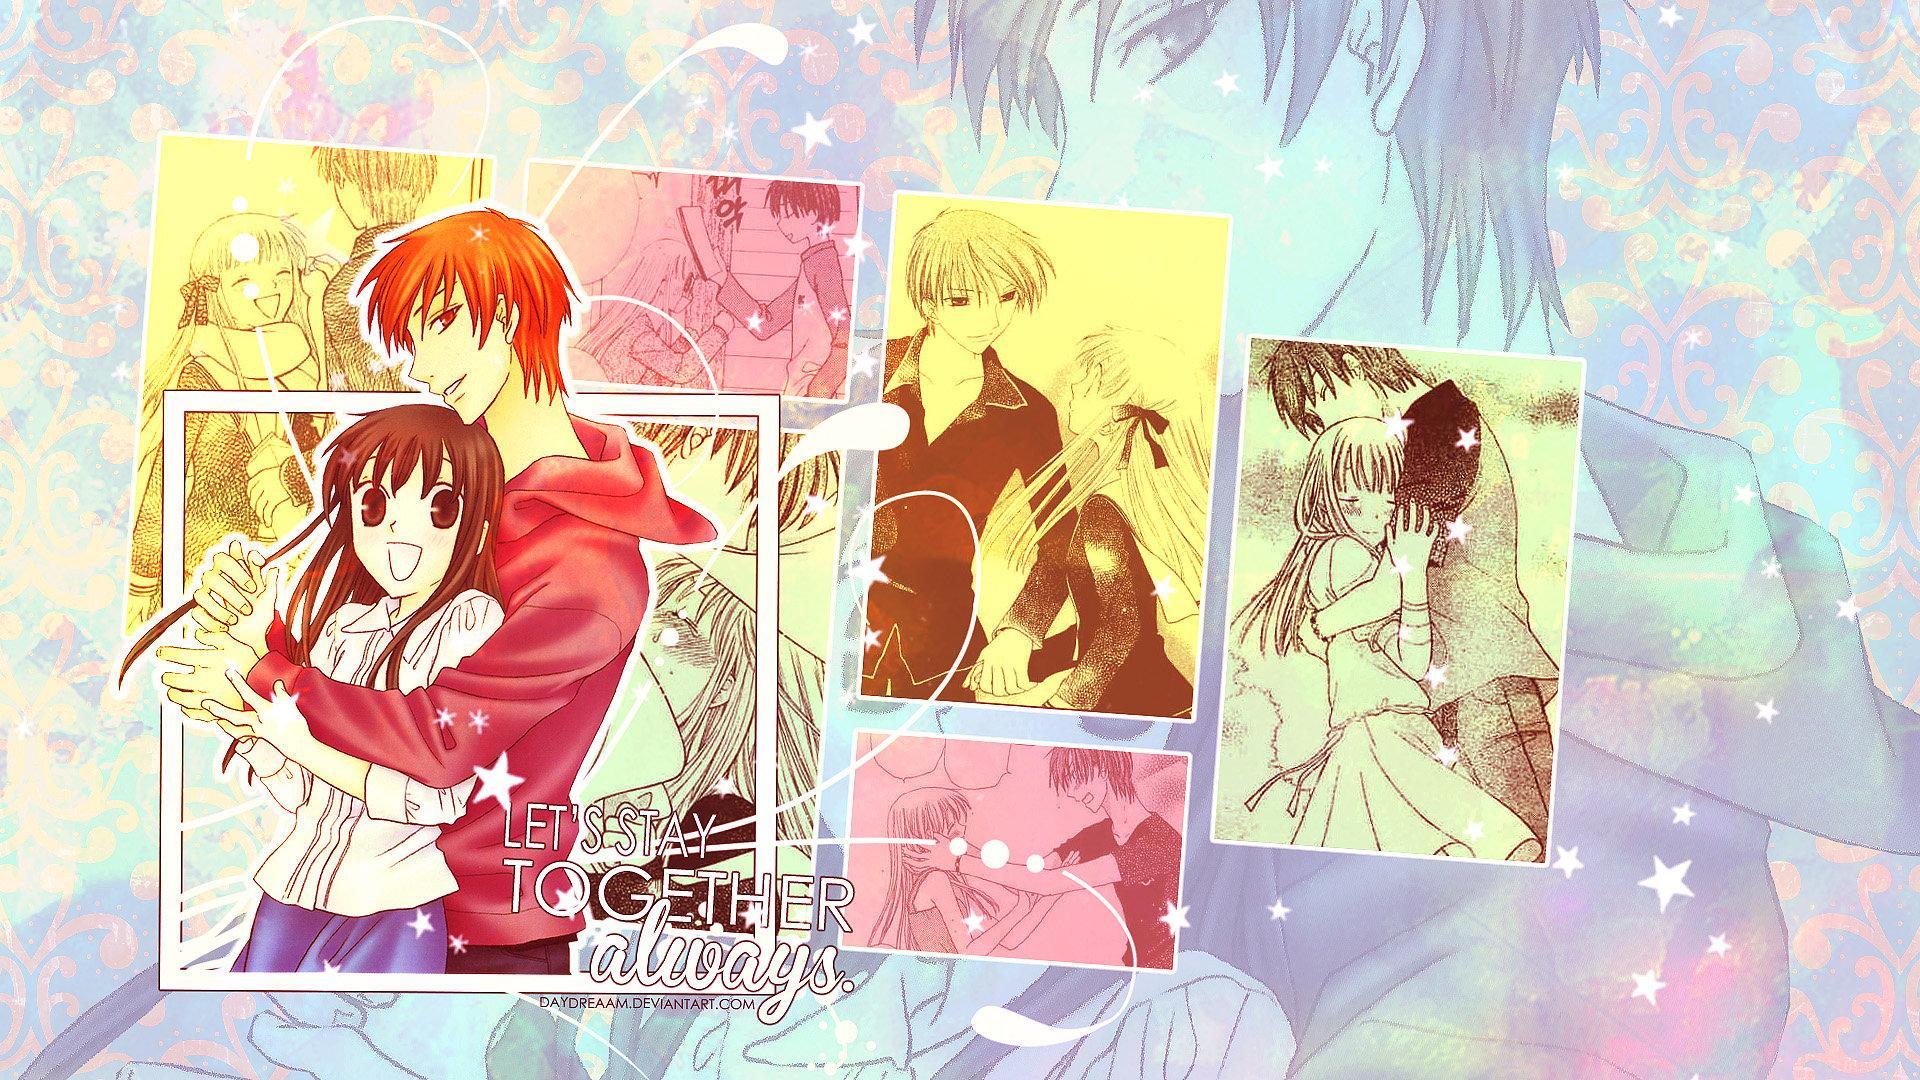 60 Fruits Basket HD Wallpapers and Backgrounds